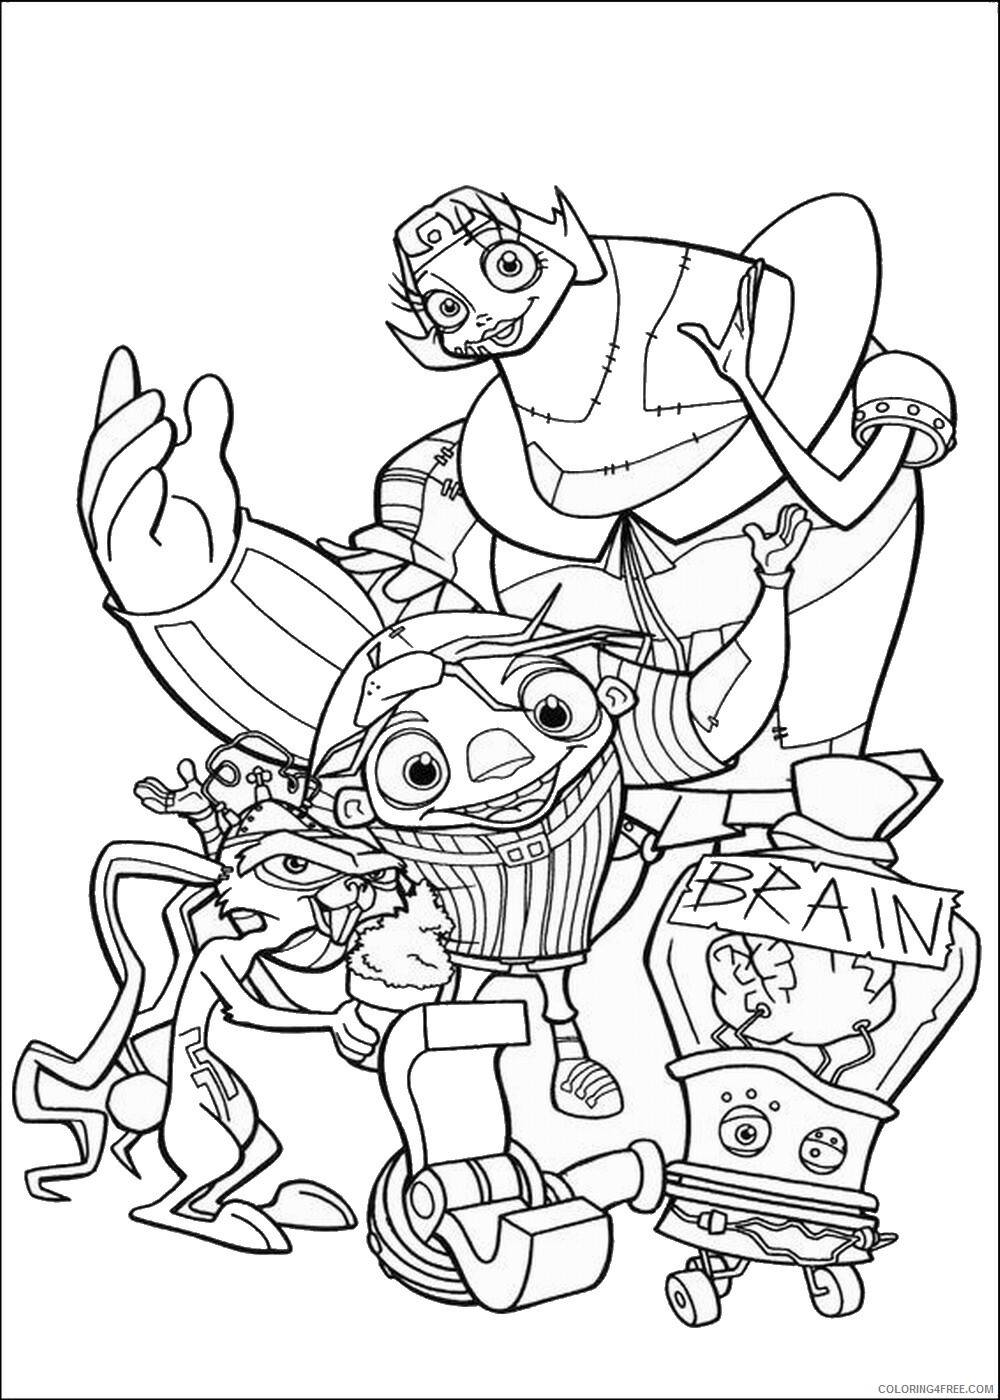 Igor Coloring Pages TV Film igor_02 Printable 2020 03927 Coloring4free